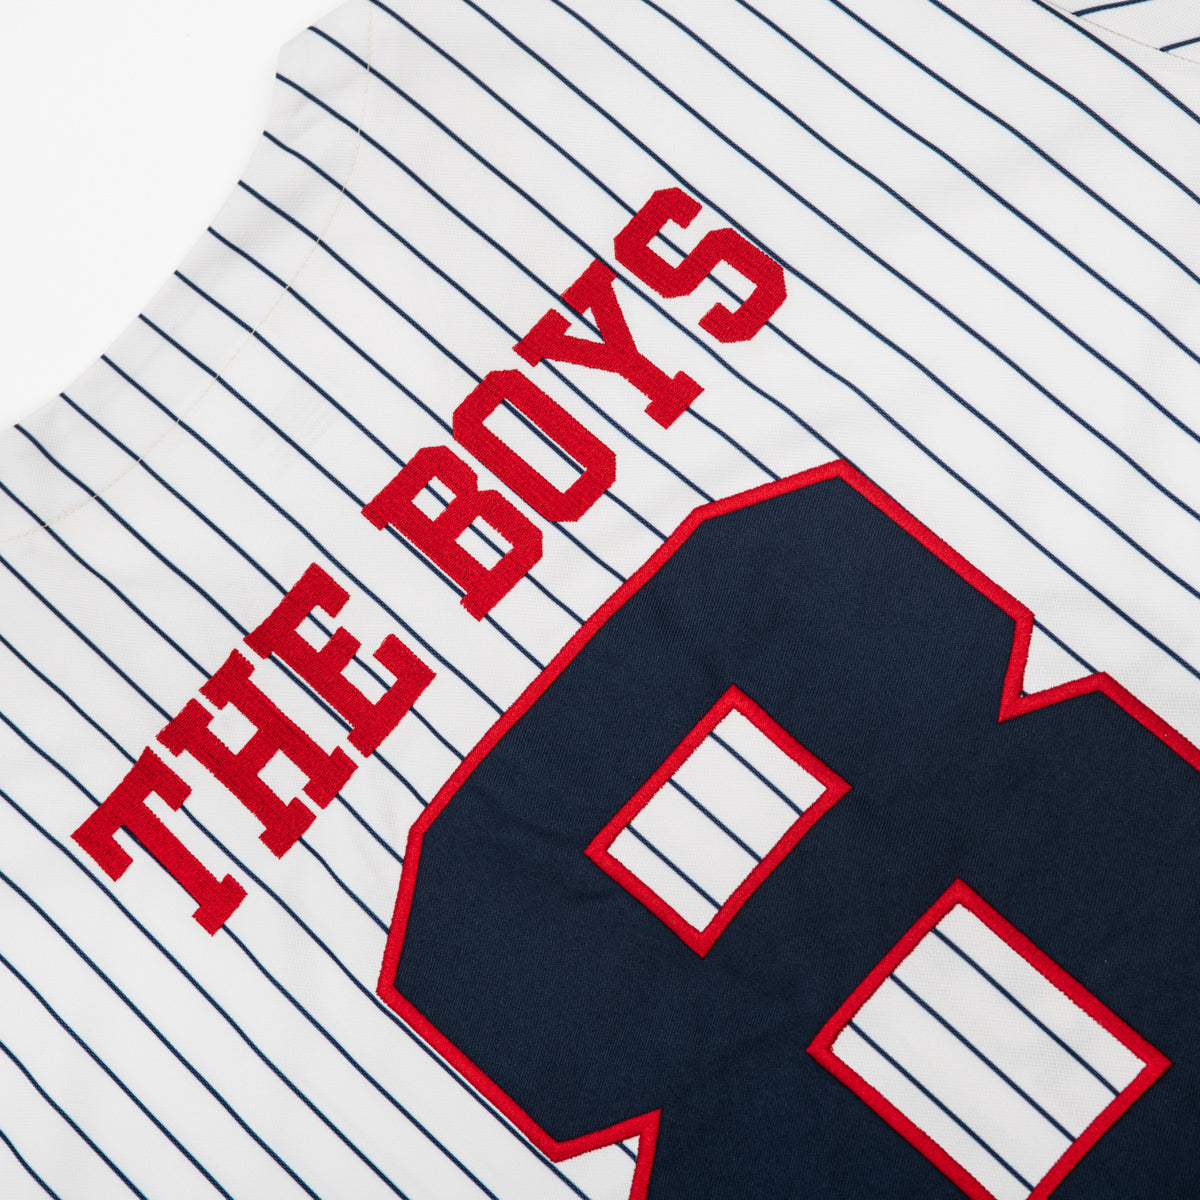 The Boys Applique Baseball Jersey-Jerseys-Bussin With The Boys-Barstool Sports